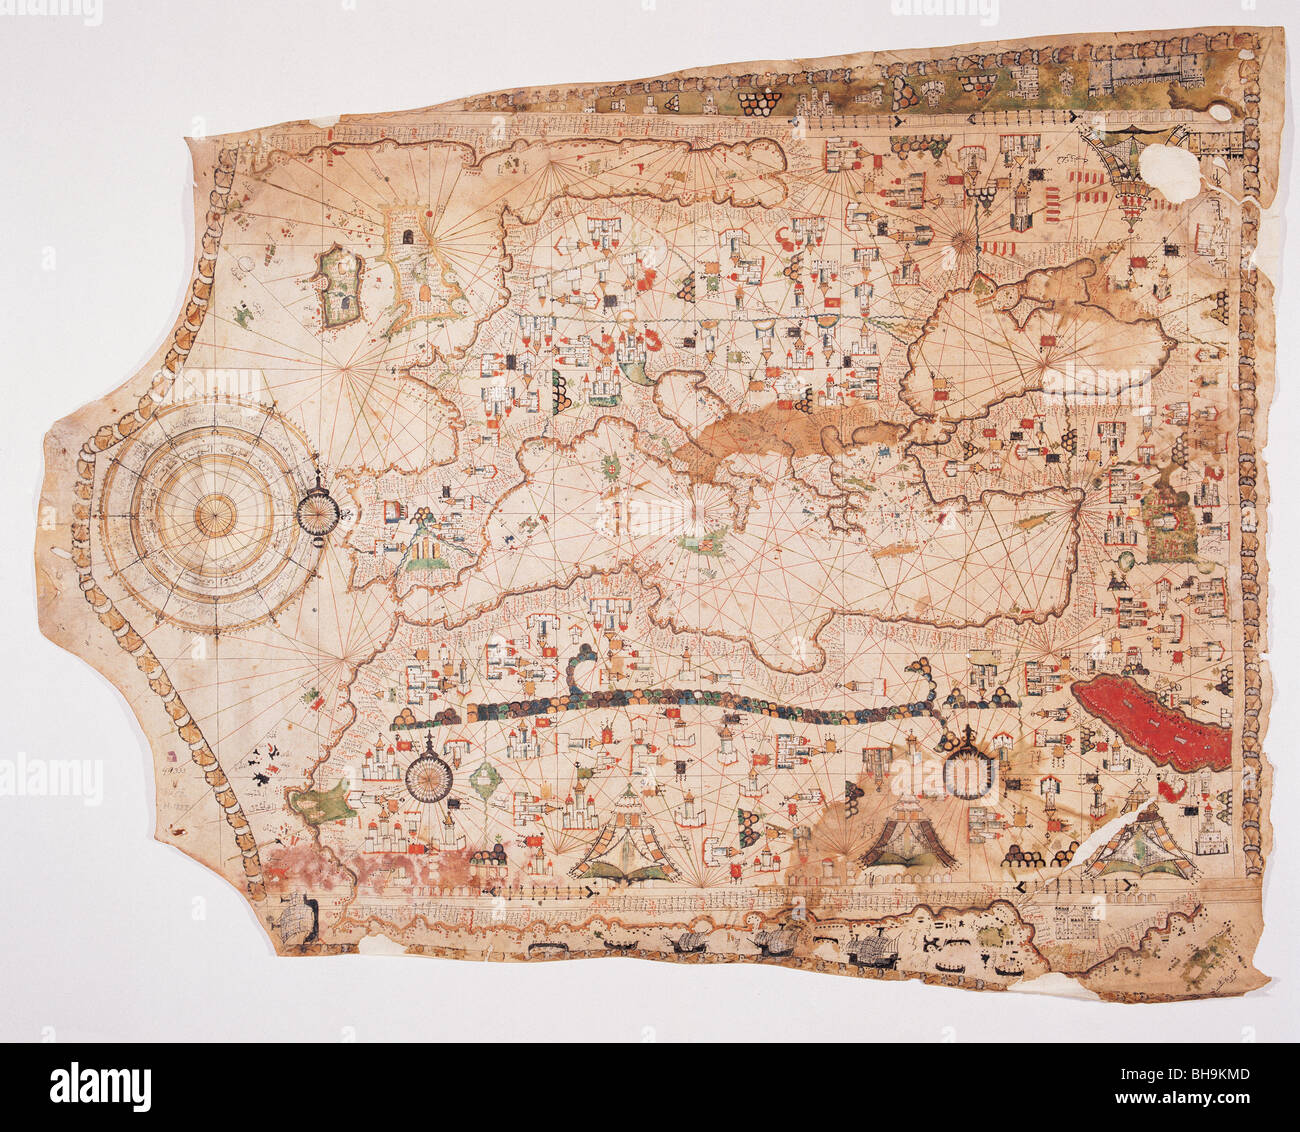 Chart of Europe, Africa and Middle East made by El Hacc Ebu'l Hasan on a parchment in 1560 Stock Photo